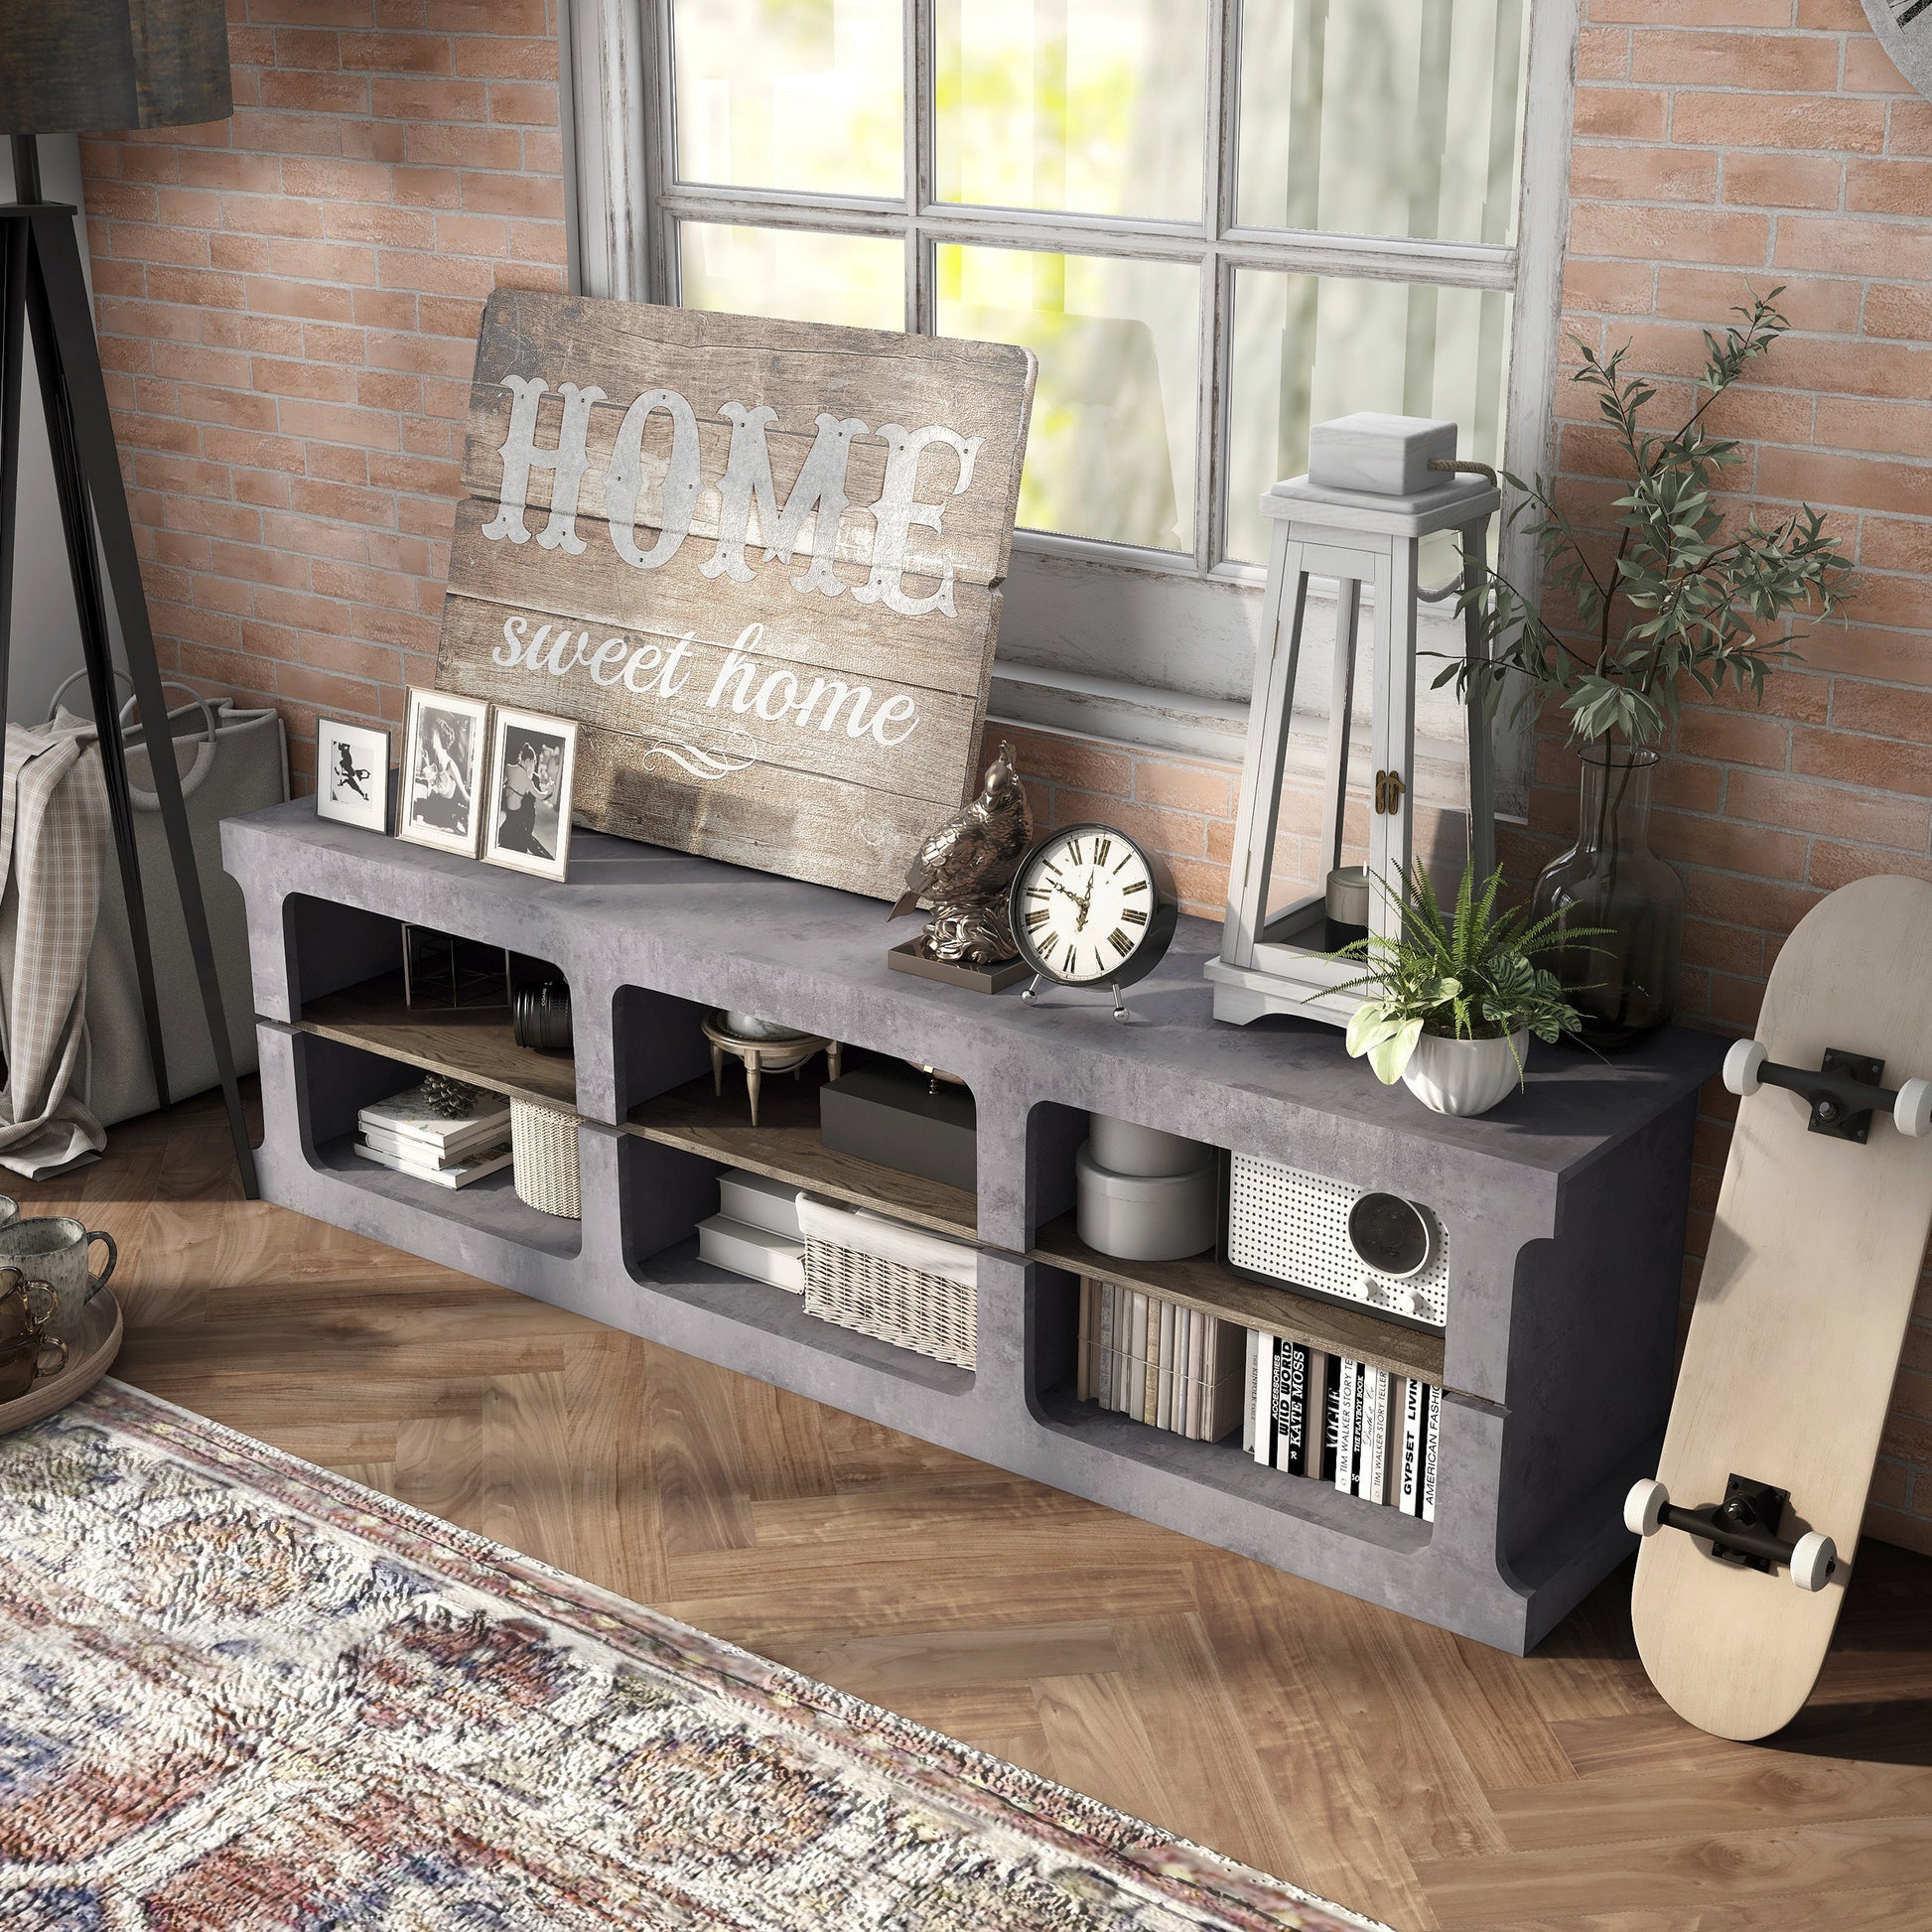 Left angled bird's view of an industrial cement and wood six-shelf TV stand in a living area with accessories